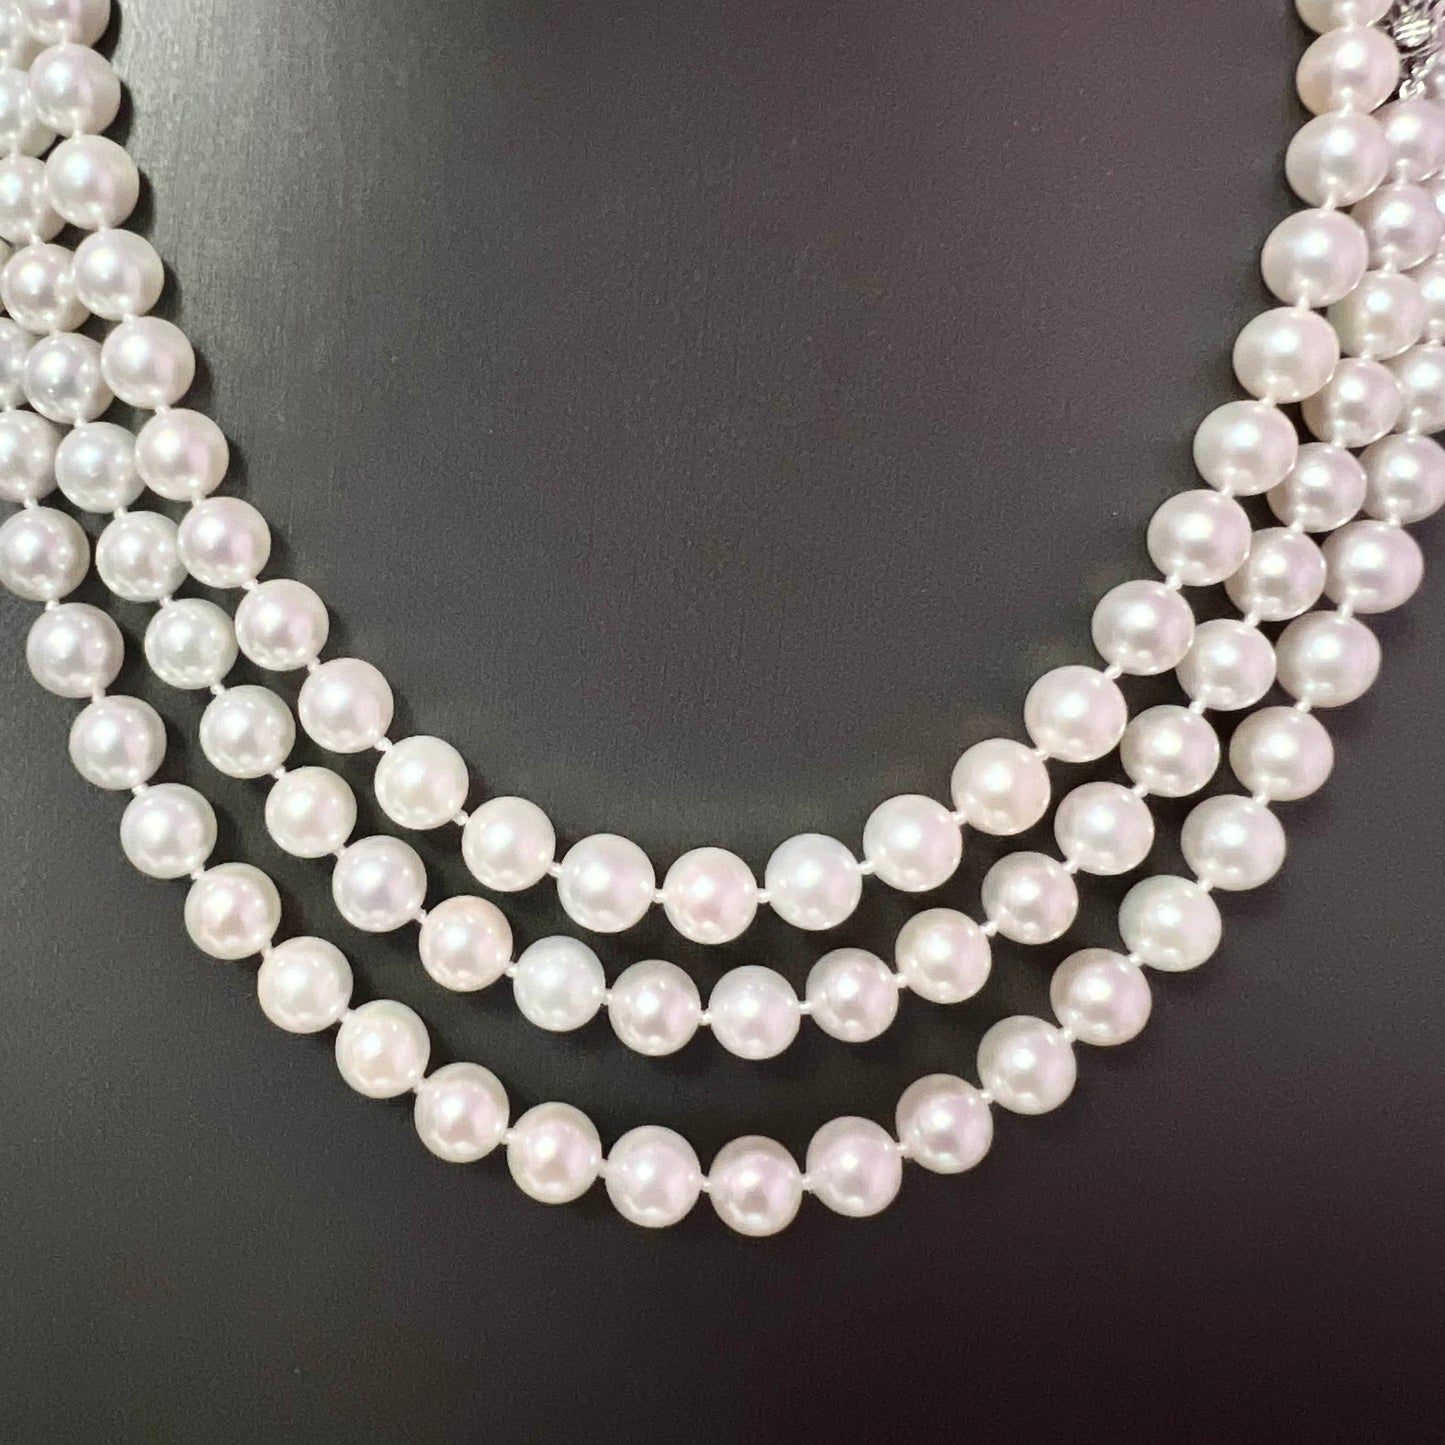 Natural Akoya Pearl Diamond Necklace 49" 18k White Gold 7 mm Certified $5,950 307927 - Certified Fine Jewelry